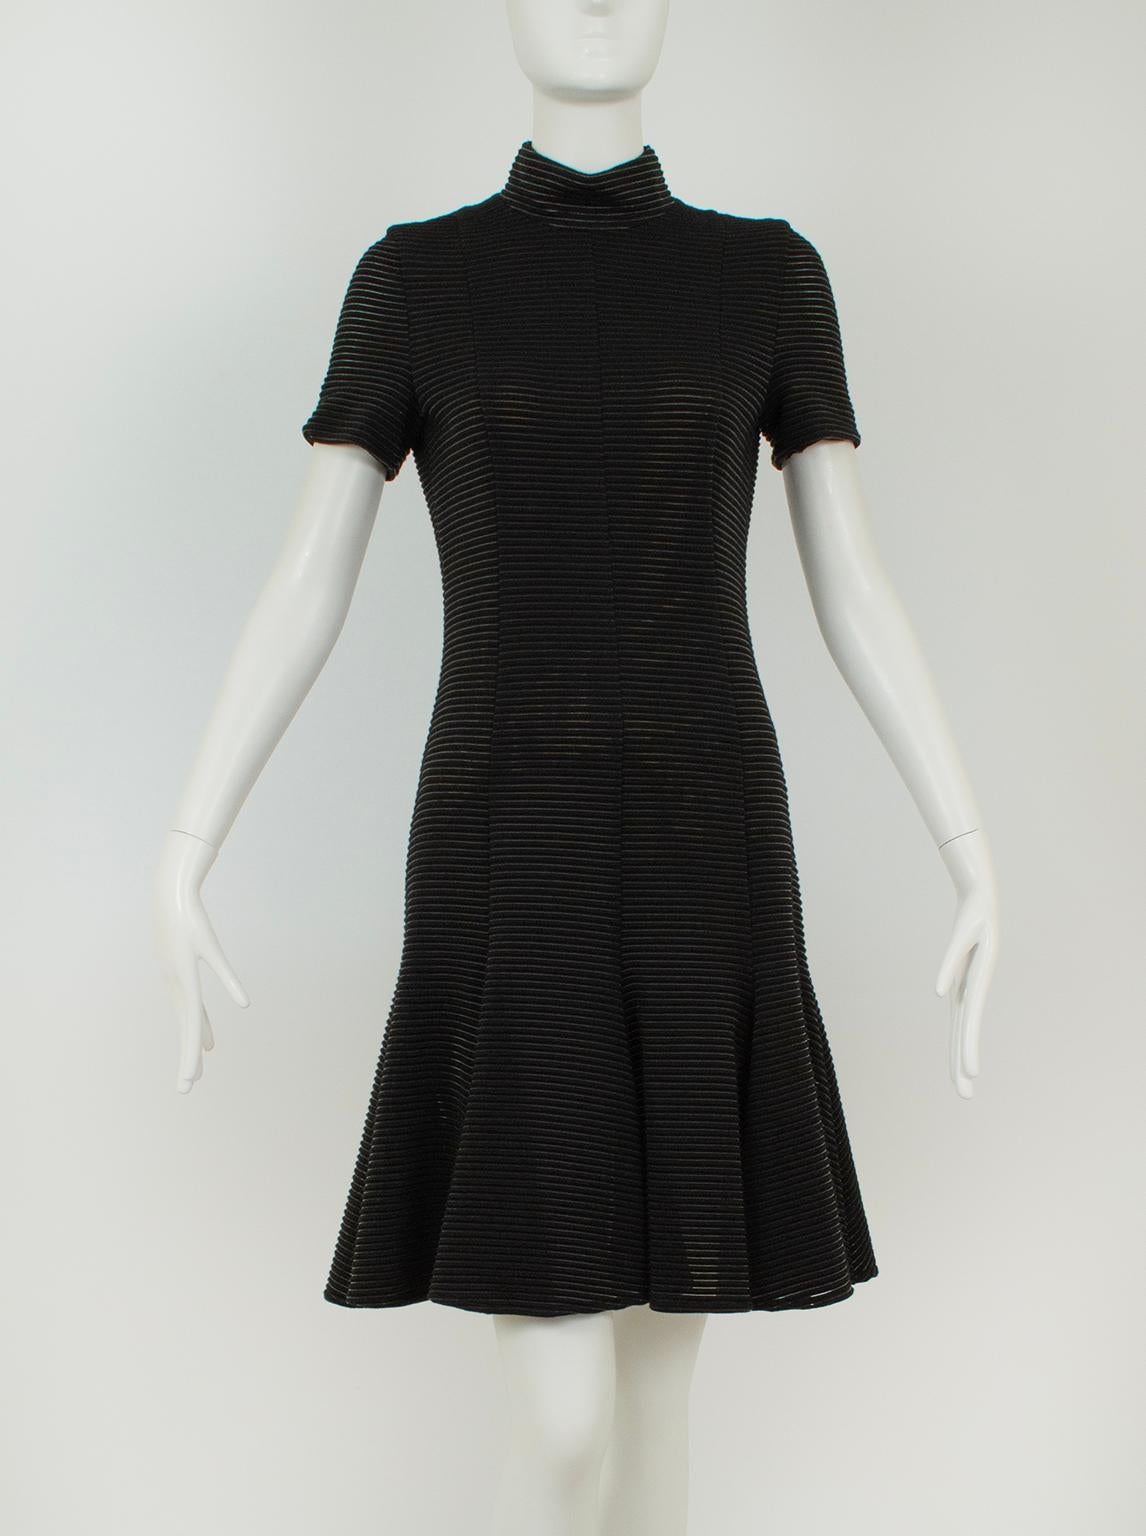 A dress that gives Alaïa a run for his money, this Akris model features the same famous fit and flare silhouette while hitting the knee instead of above it. Short sleeves and a mock t-neckline offer daywear styling that can easily transition to